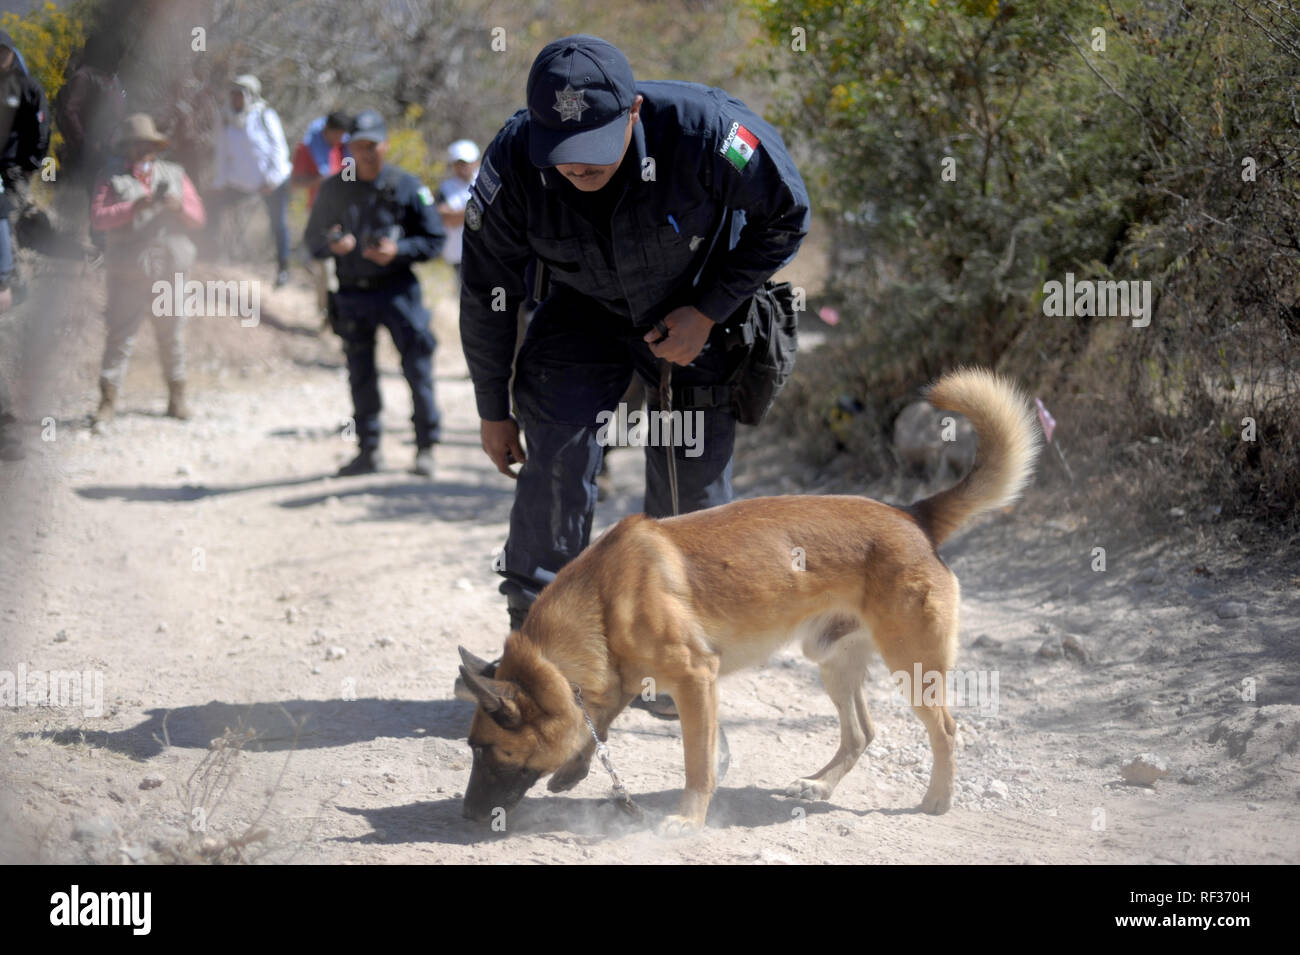 23 January 2019, Mexico, Huitzuco: A police sniffer dog helps in the search for hidden graves. More than 40,000 people are considered missing in Mexico. A group of relatives tries on their own to find hidden graves and thus perhaps to make the mourning possible for some families. (to dpa "The Search for Certainty - Hidden Tombs in Mexico" of 24.01.2019) Photo: Jesus Alvarado/dpa Stock Photo